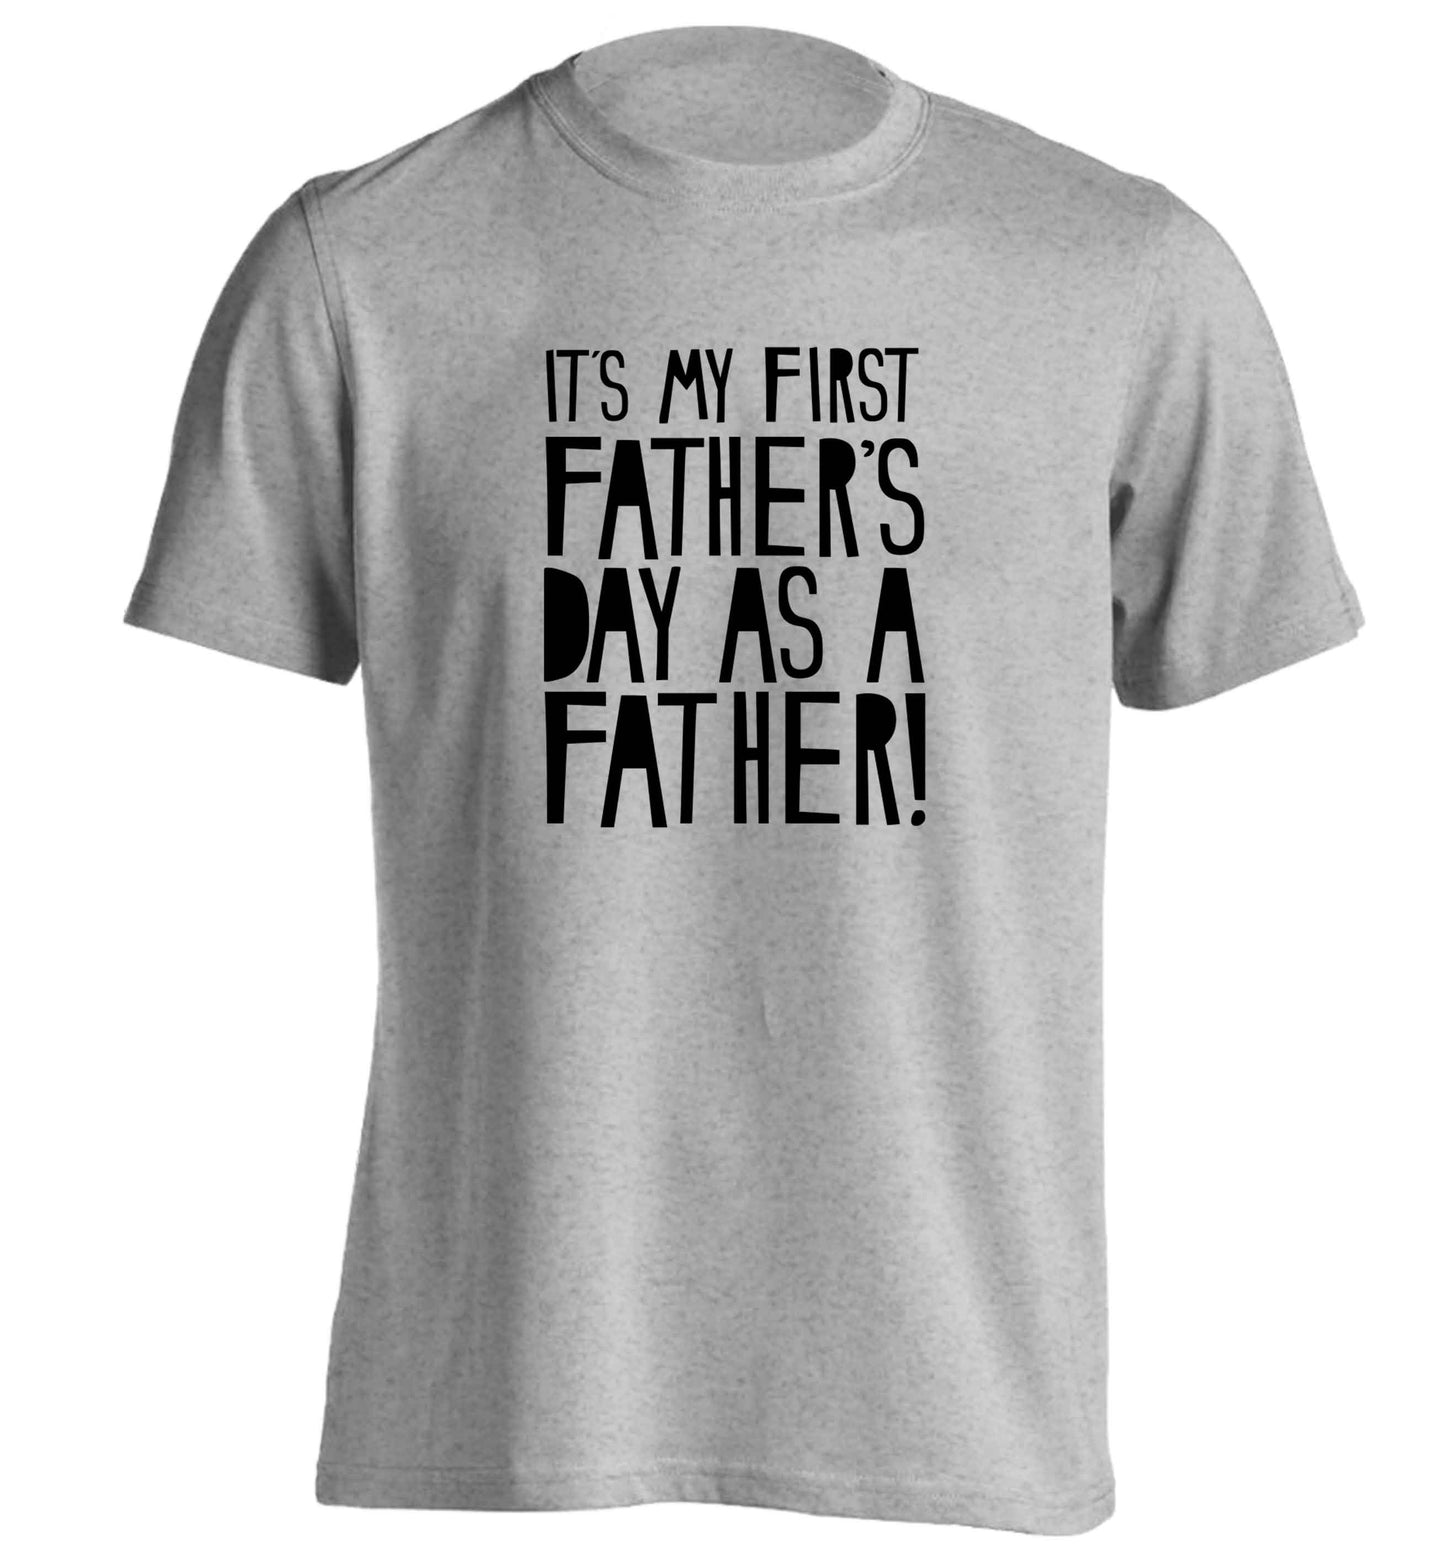 It's my first father's day as a father! adults unisex grey Tshirt 2XL